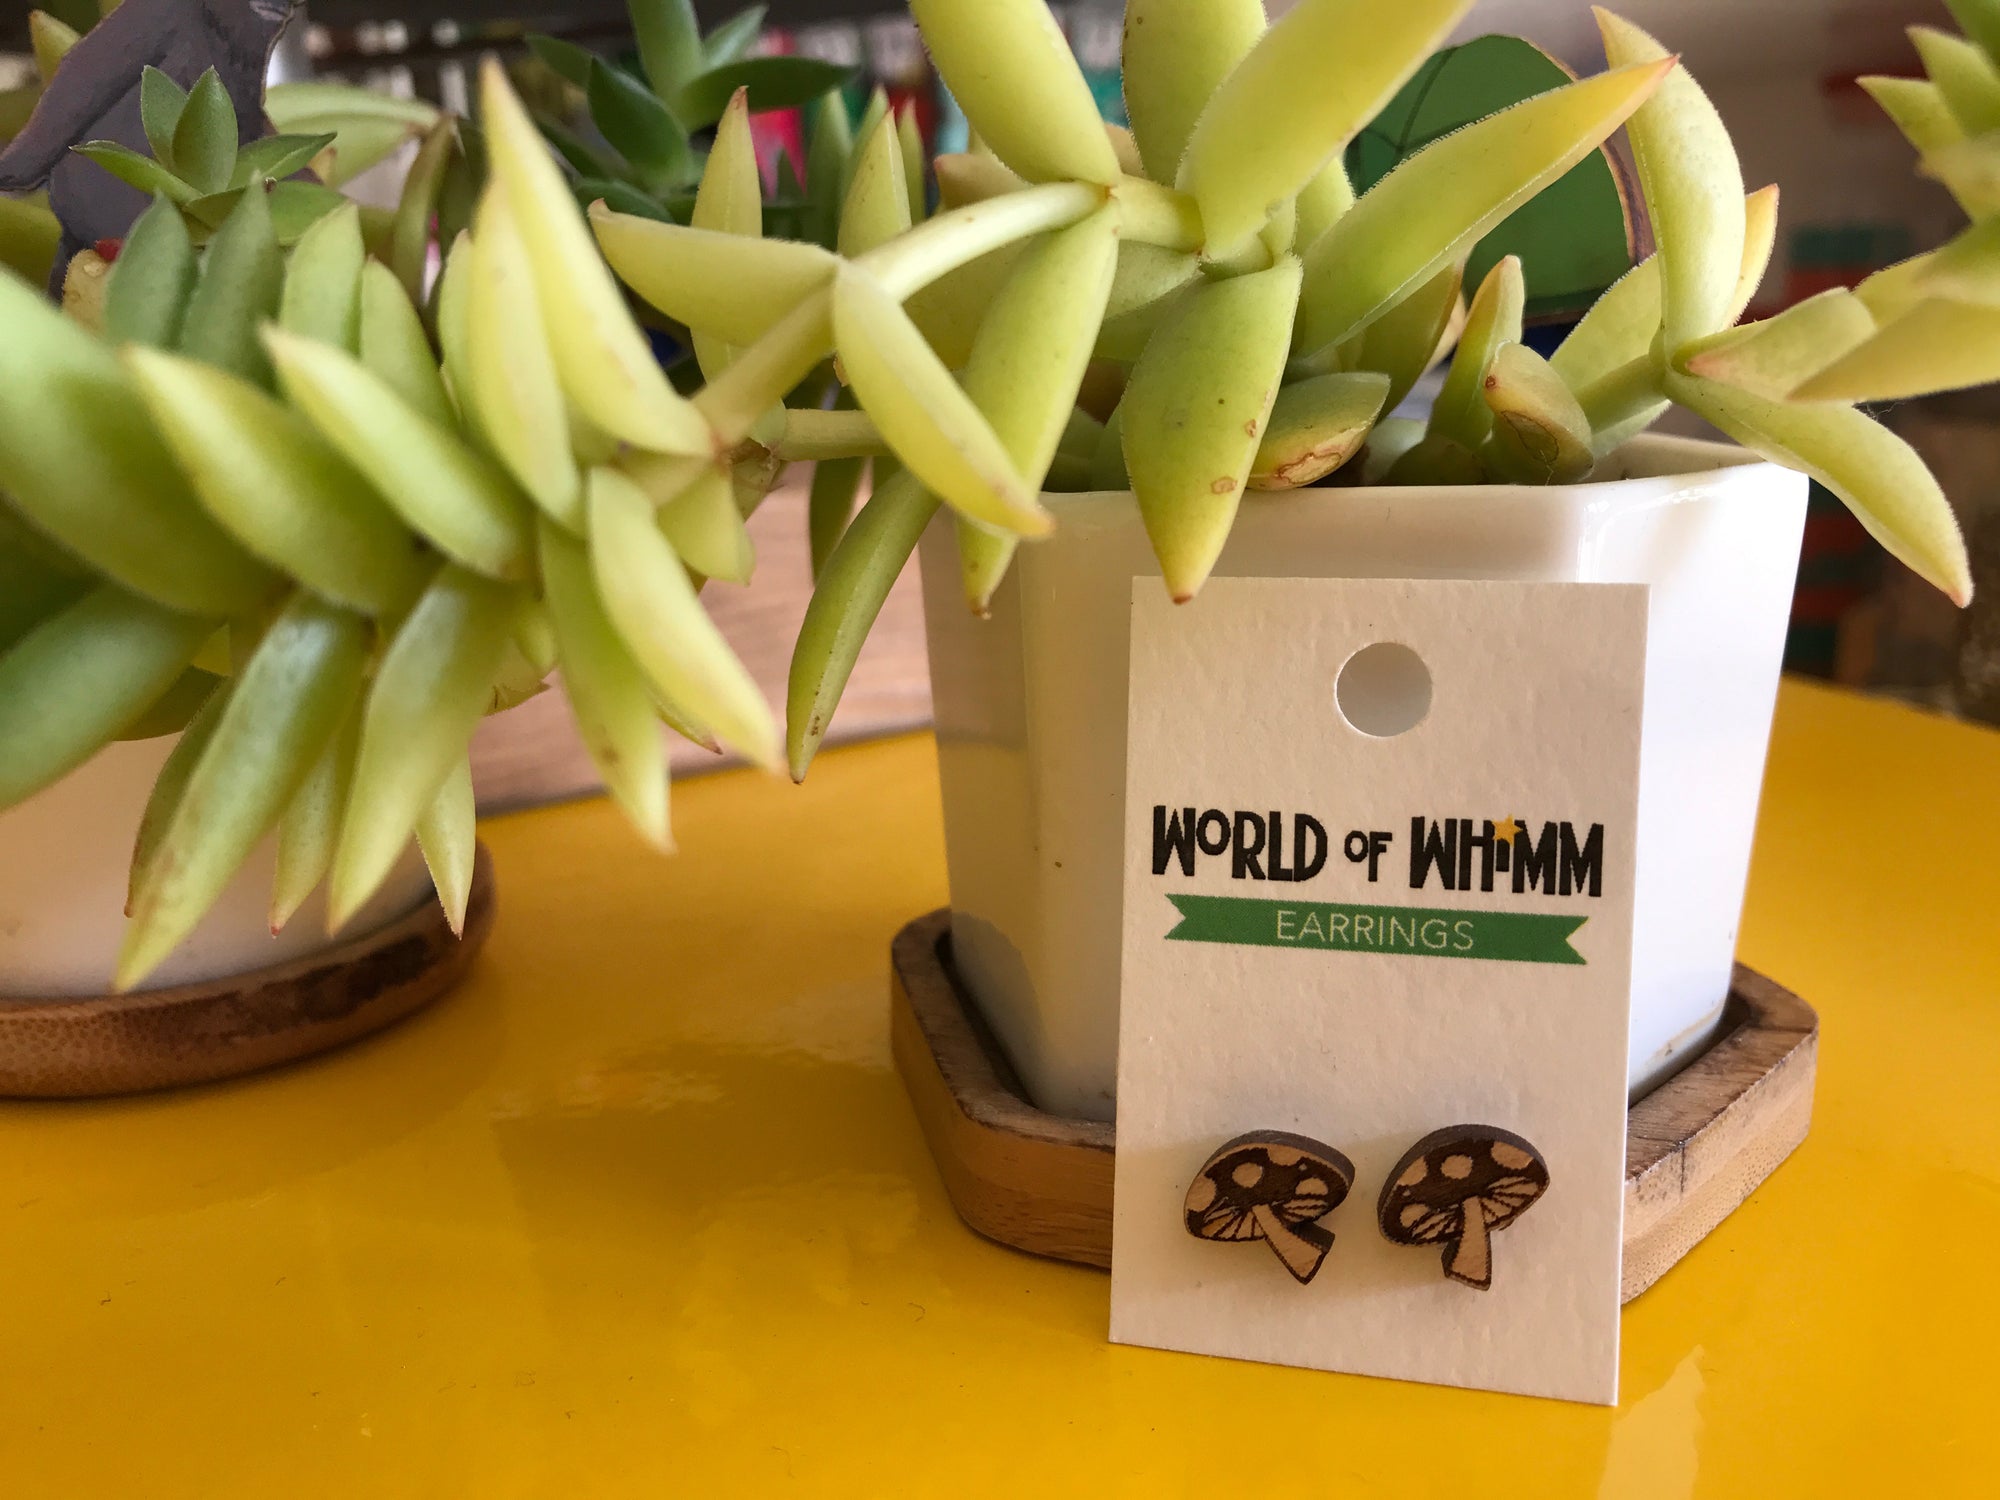 Wee laser cute earrings in the shape of mushrooms are attached to a white backing card that says "World of Whimm." They are leaning against a small succulent plant on a bright yellow table. 